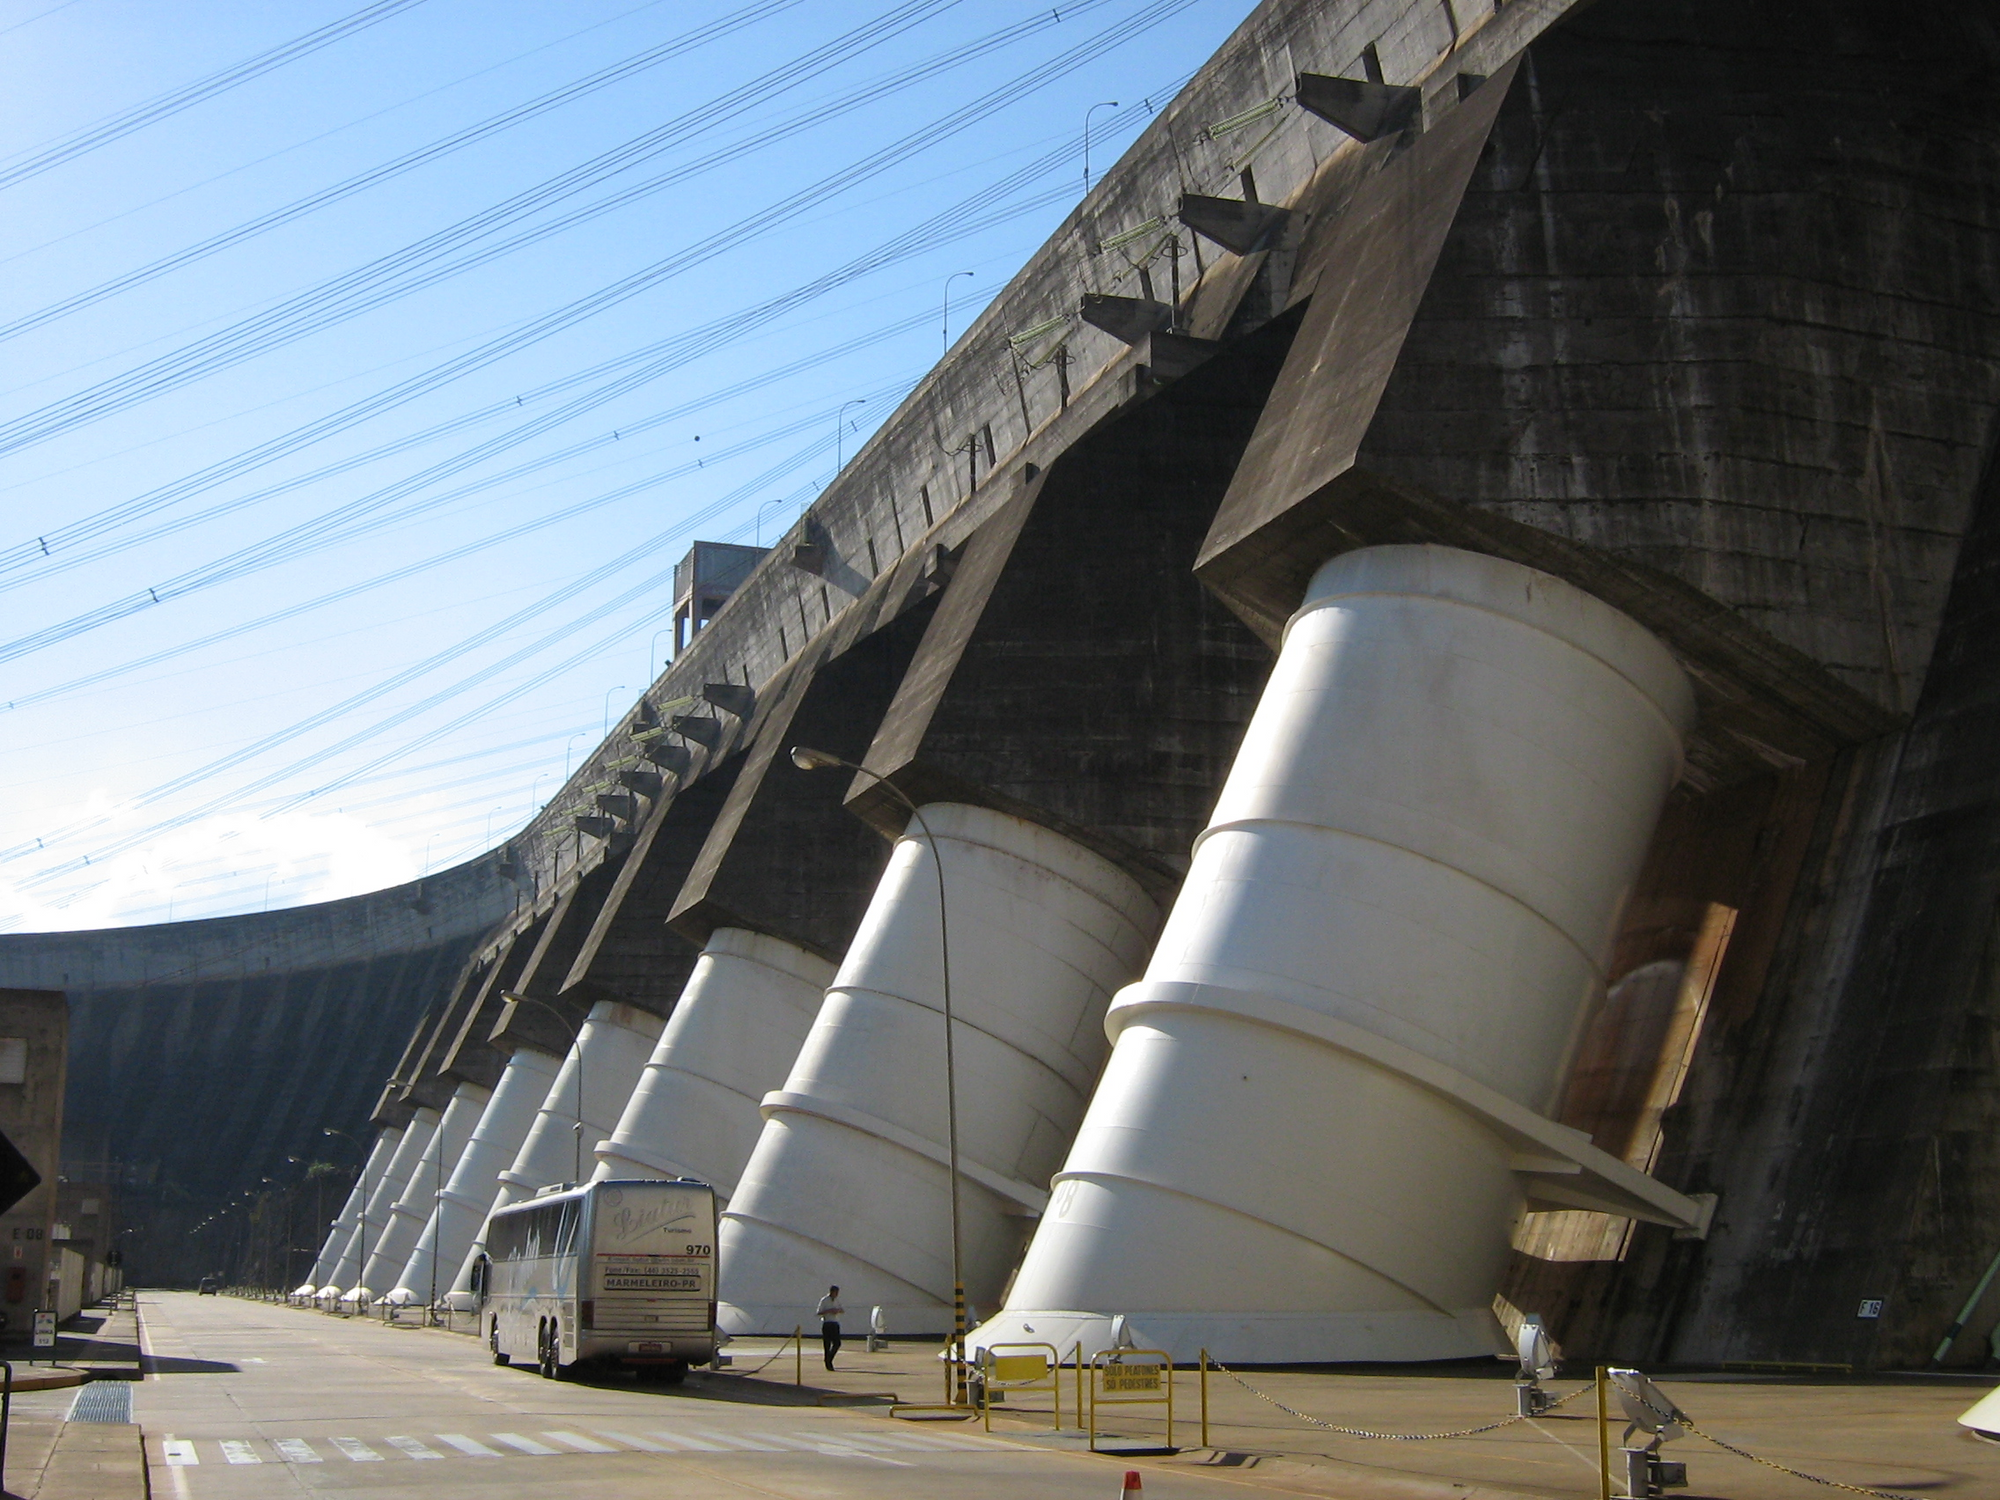 The cylinders that feed water to the Itaipú dam's turbines